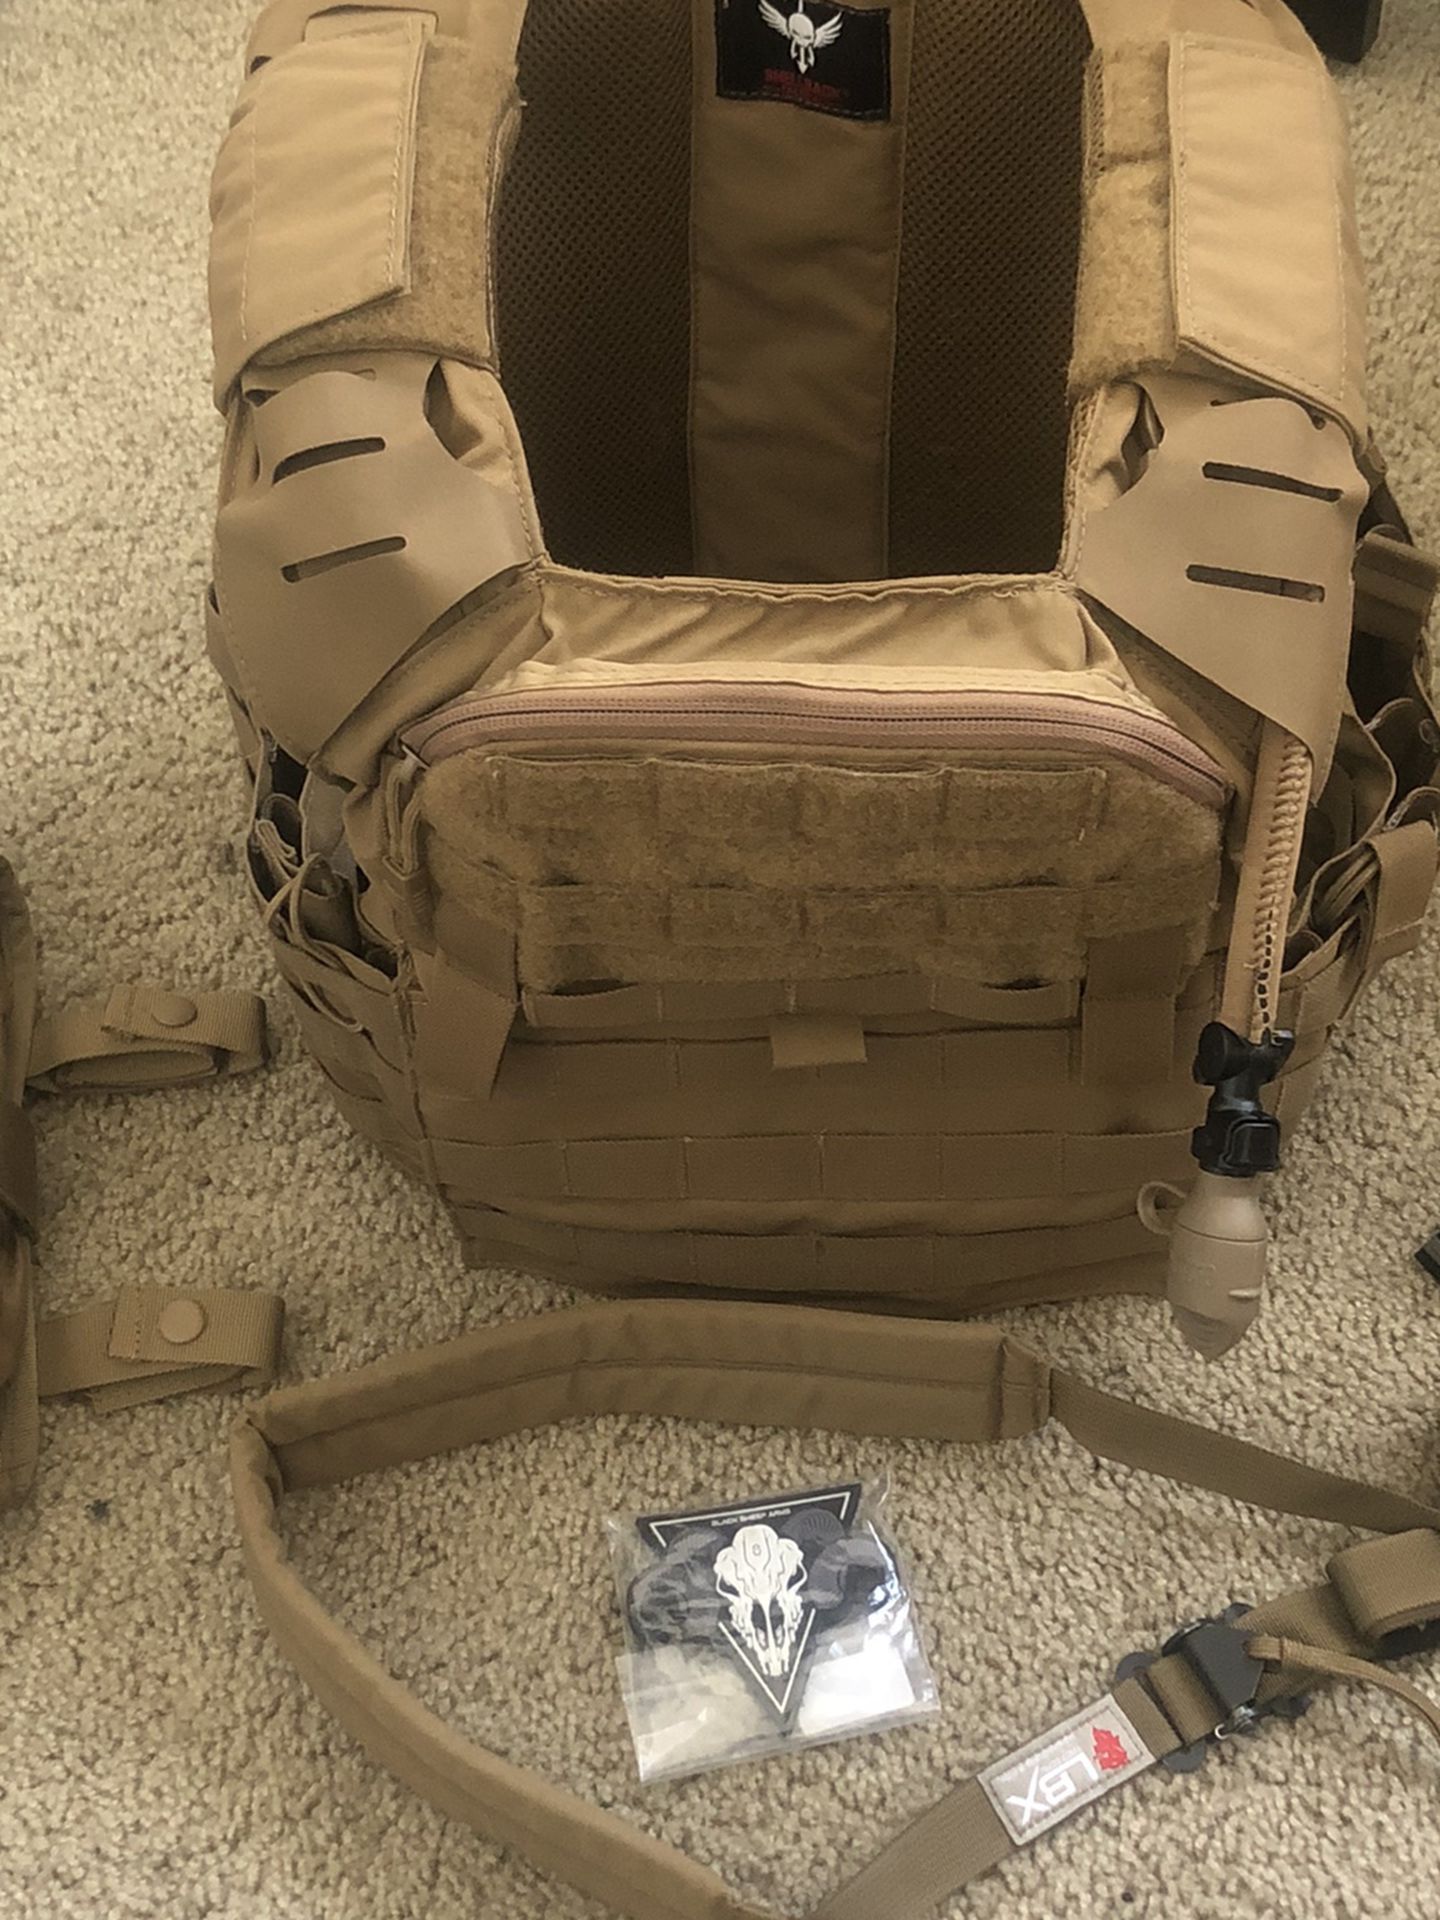 Shellback Tactical Banshee Elite 2.0 Plate Carrier With Elite Cummerbund (coyote tan), Camelbak Armorbak Pack, Mag Pouch, Sling, And Patch.